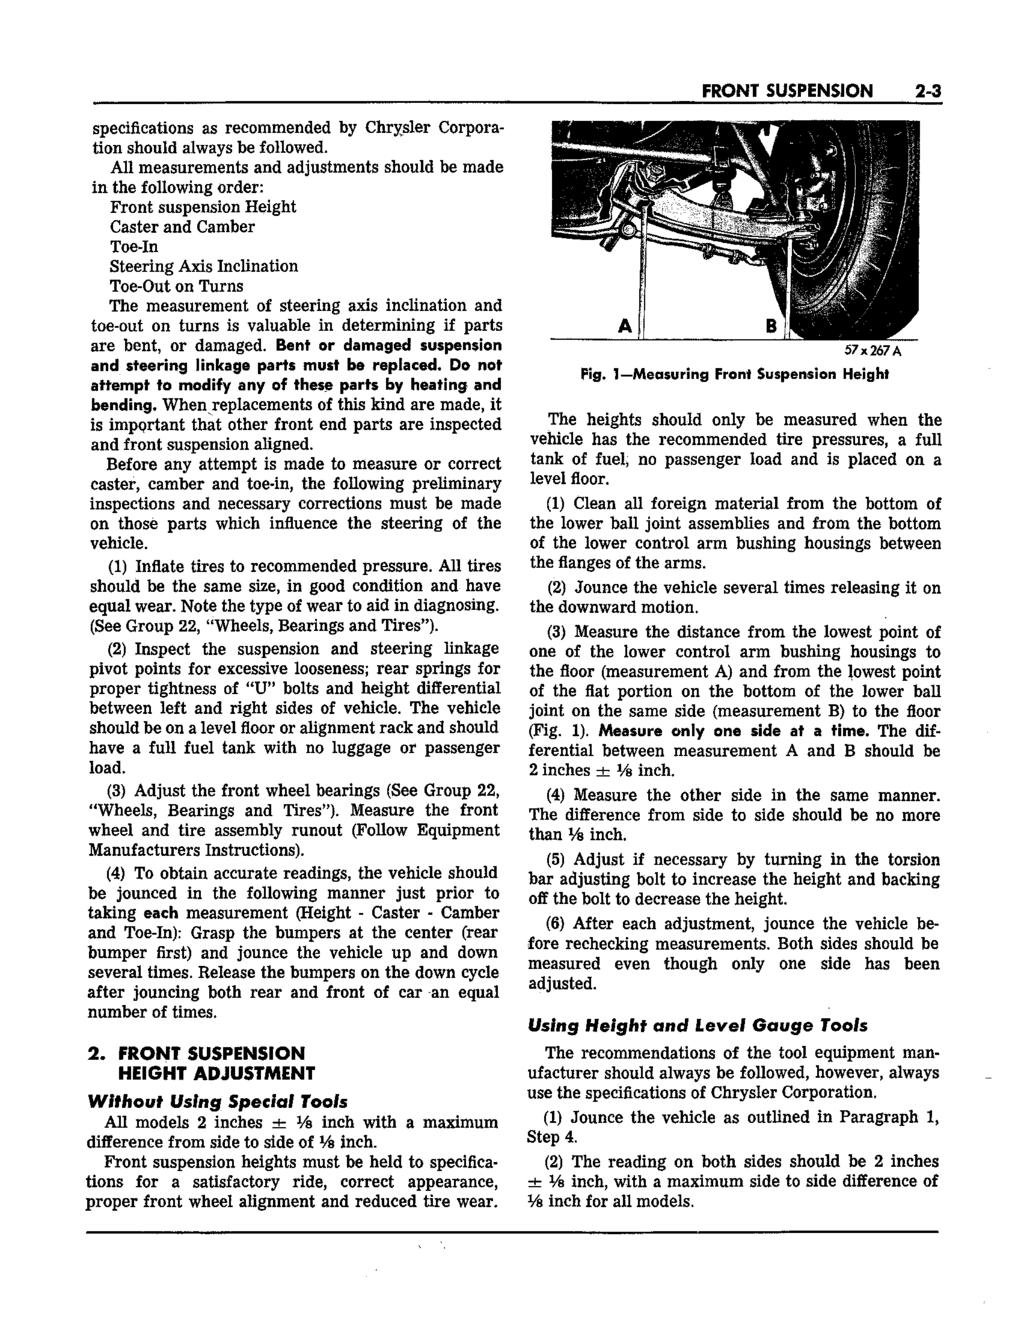 FRONT SUSPENSION 2-3 specifications as recommended by Chrysler Corpora* tion should always be followed.